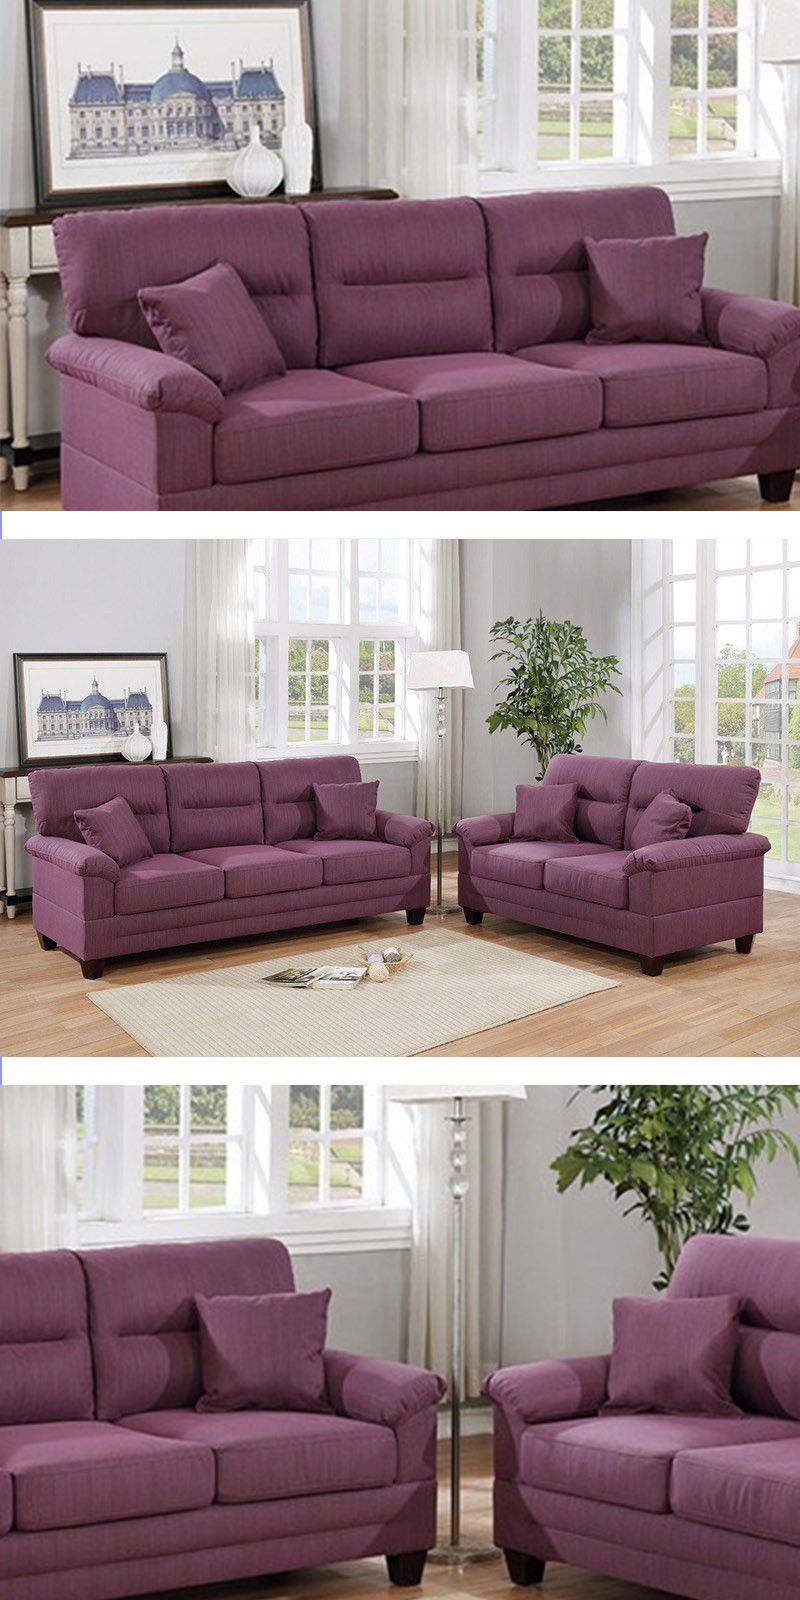 LOVESEAT & SOFA | LIVING ROOM | COUCH | SECTIONAL | JUEGO DE SALA | DELIVERY FREE BY TMF 🚚📦